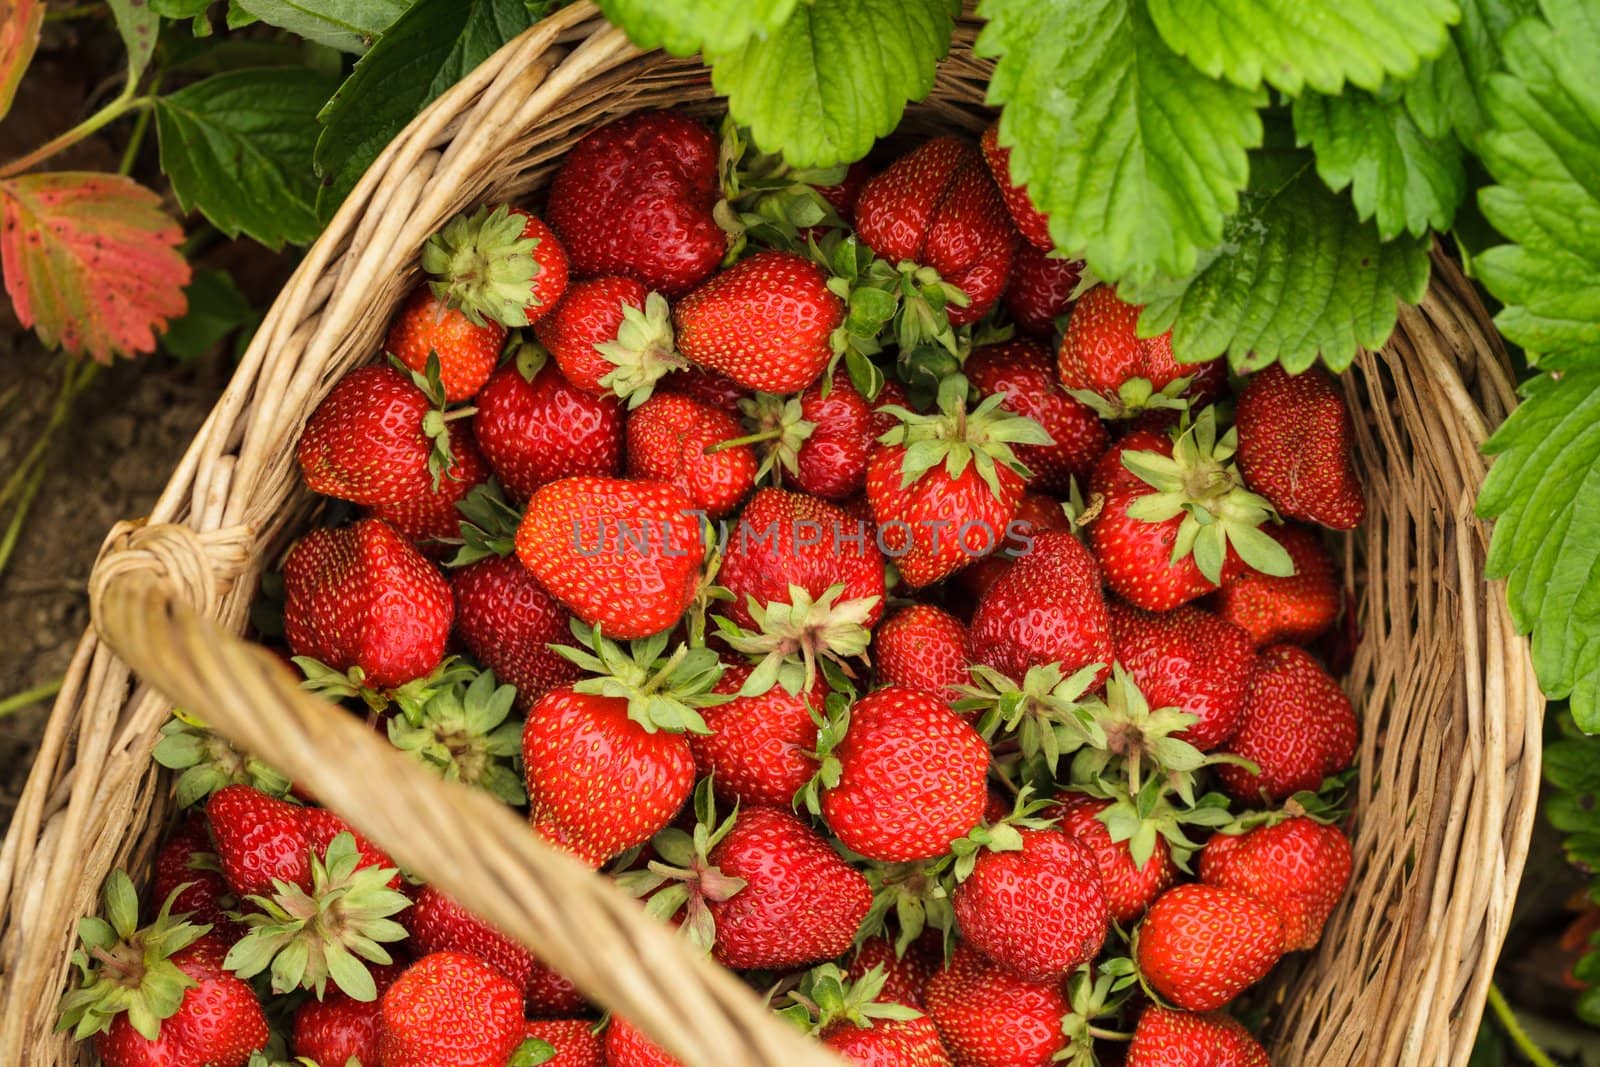 Strawberries in a basket in the garden outdoors